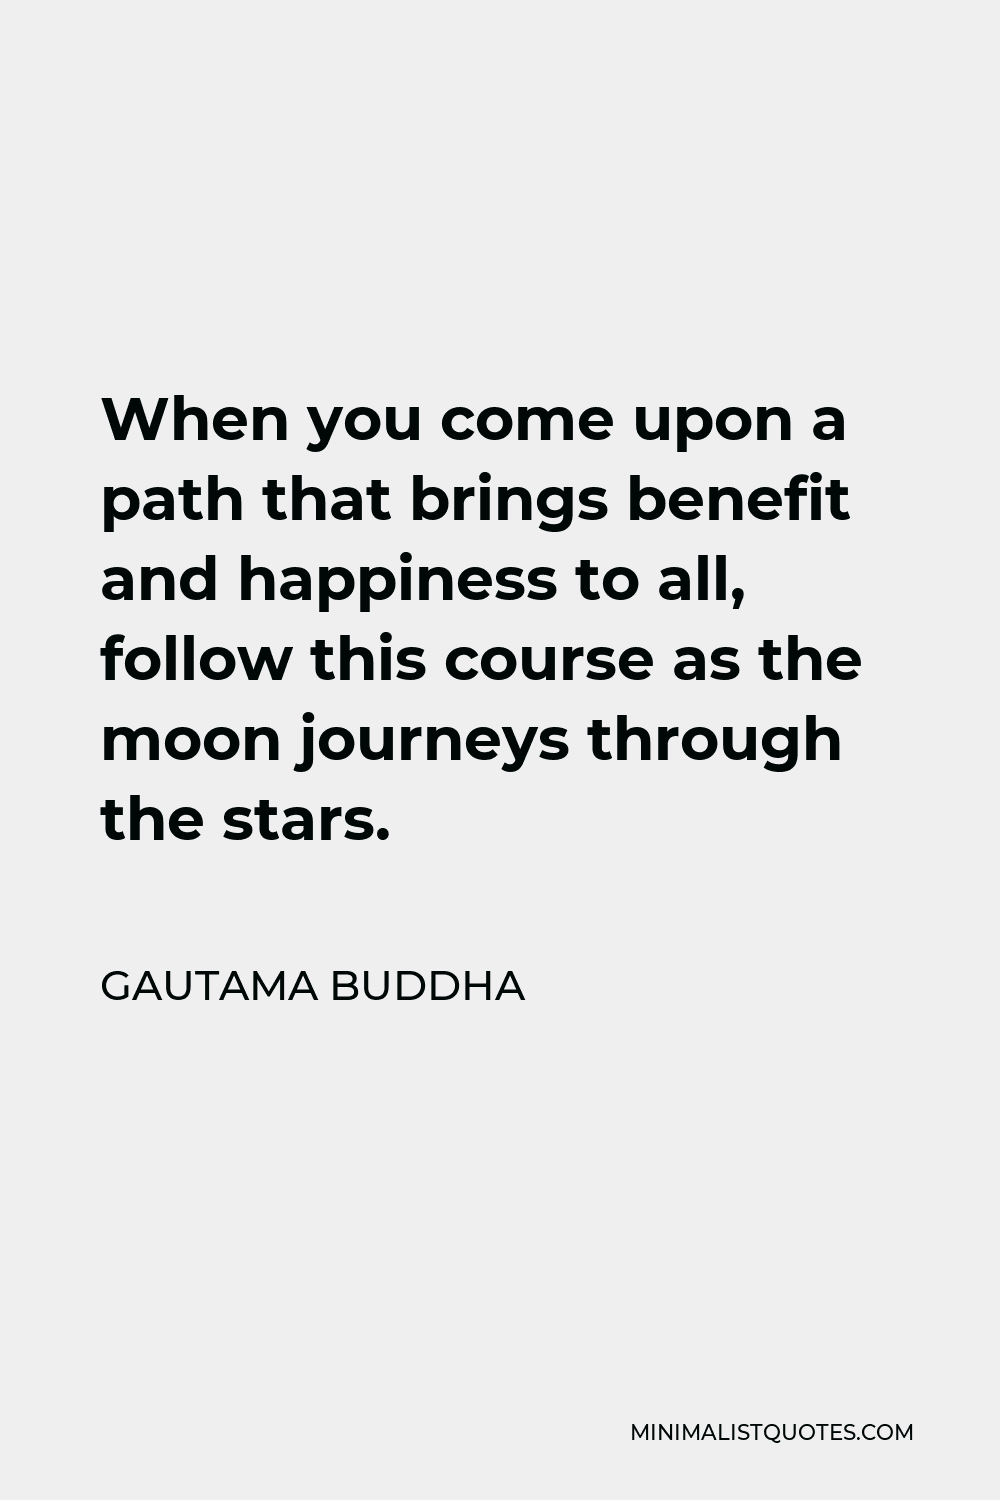 Gautama Buddha Quote - When you come upon a path that brings benefit and happiness to all, follow this course as the moon journeys through the stars.